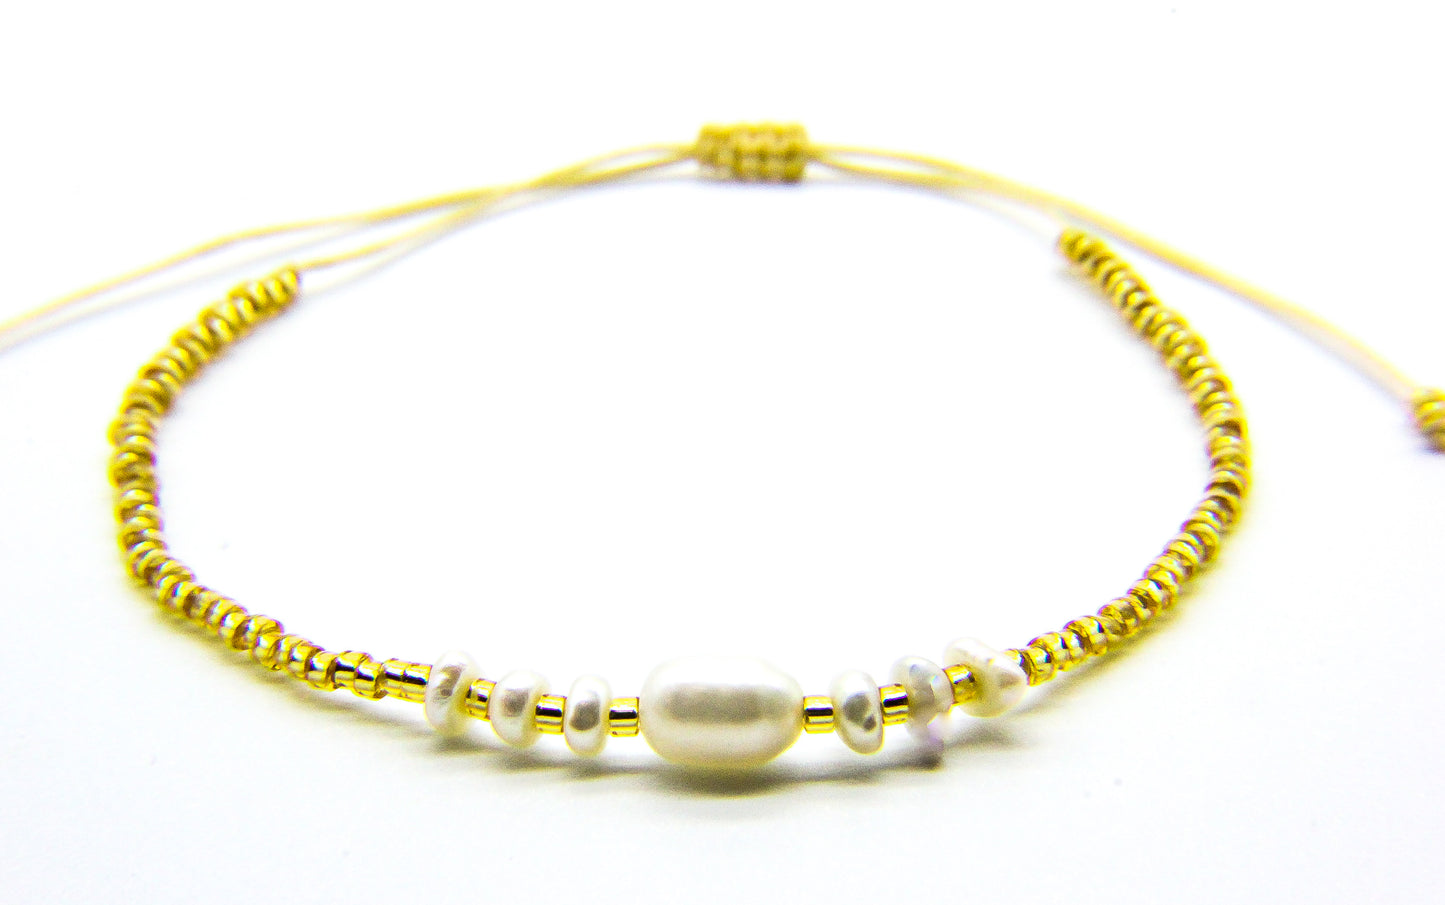 Gold Bracelet with pearls on white background 